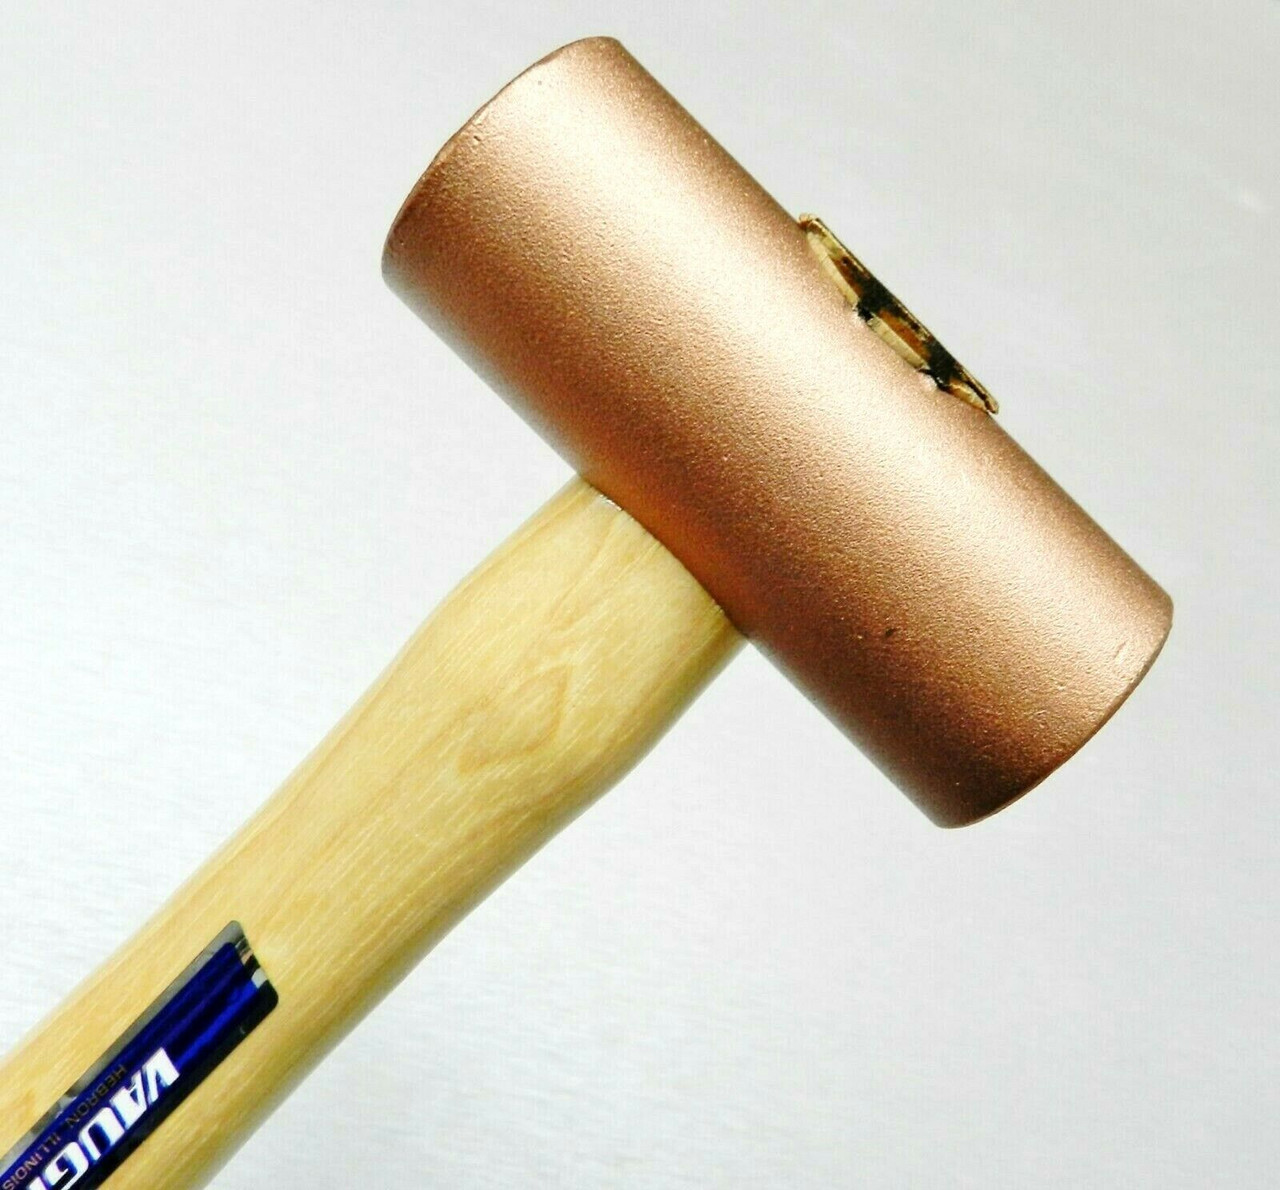 Copper Mallet 4 Pound Solid Head Vaughan 59216 Copper Hammer CM200 2" Face